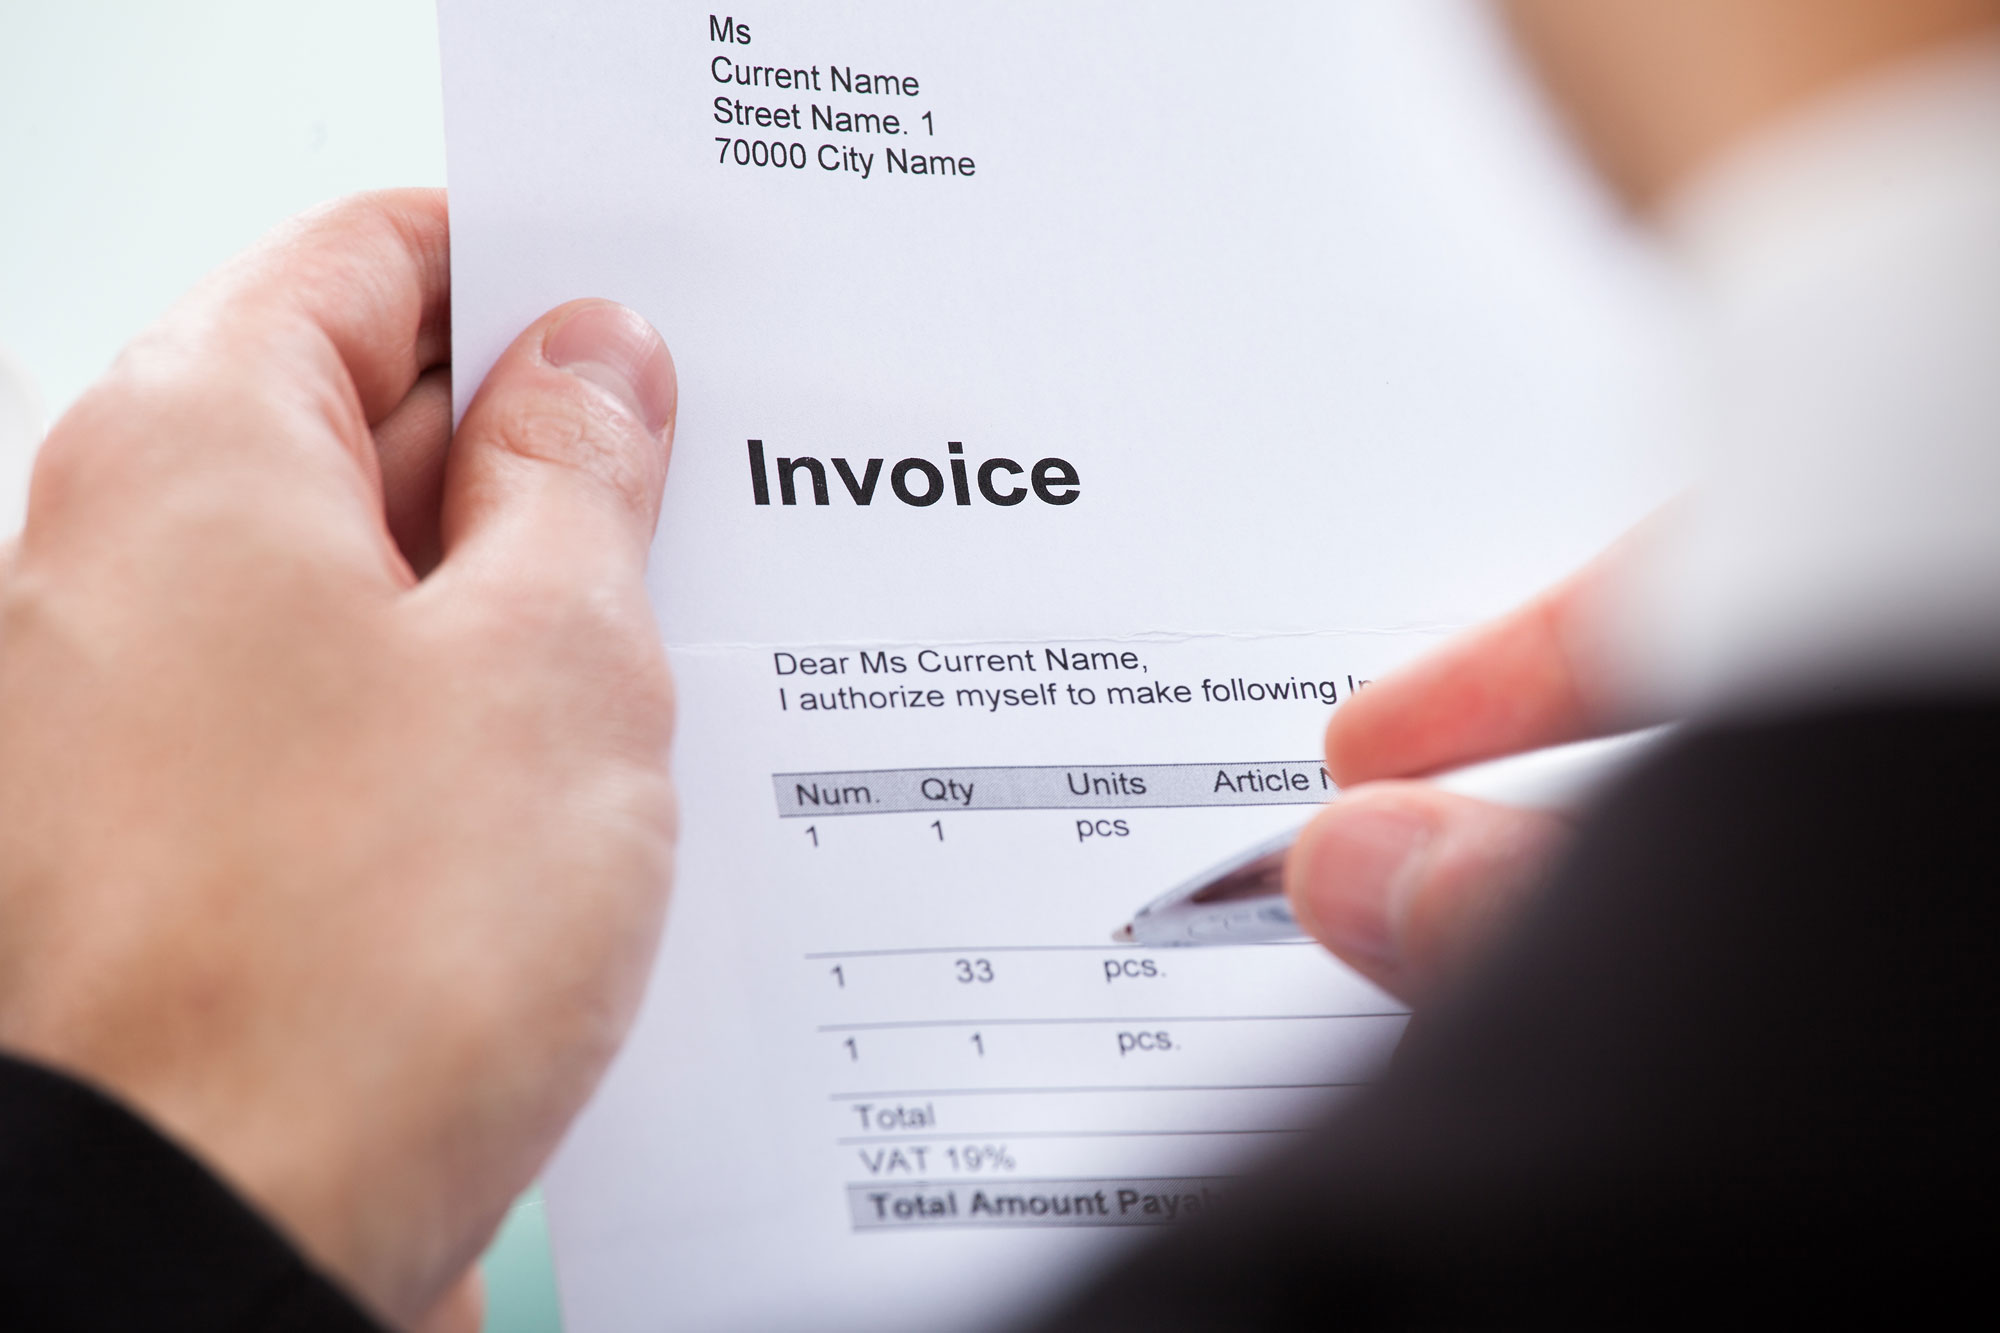 When to issue an invoice? (29)